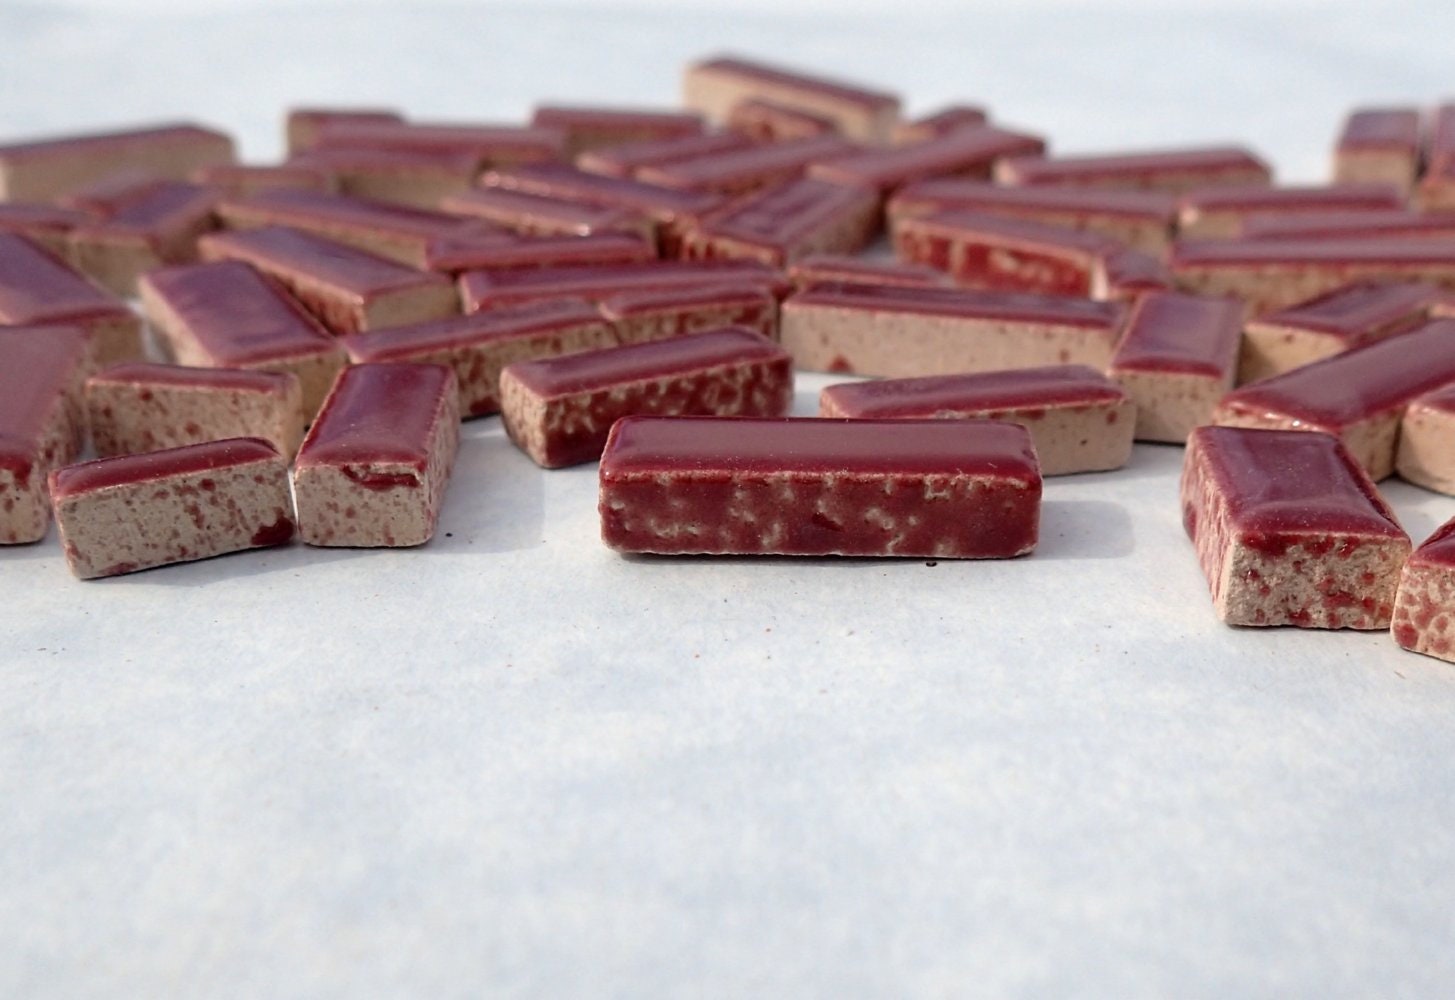 Burgundy Mini Rectangles Mosaic Tiles - 50g Ceramic in Mix of 3 Sizes 3/8" and 5/8" and 3/4"